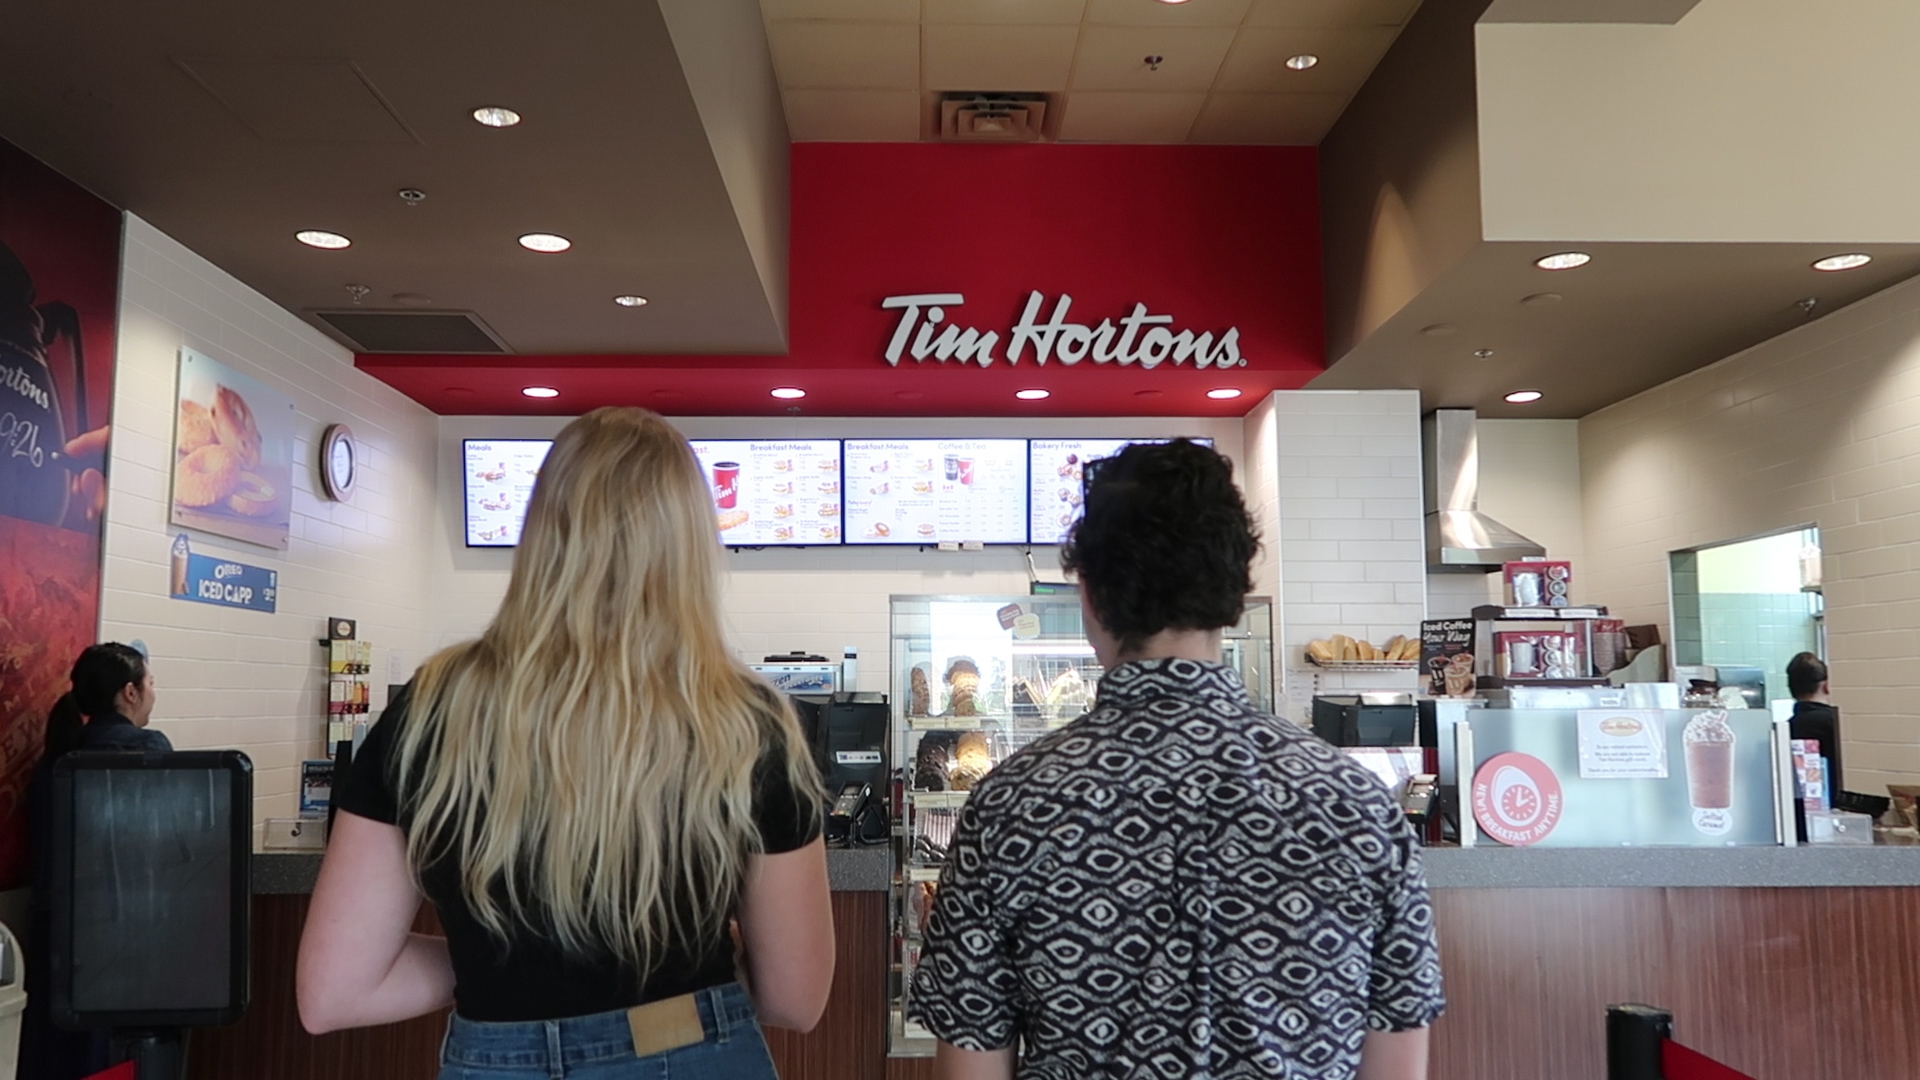 two students waiting in line at Tim hortons